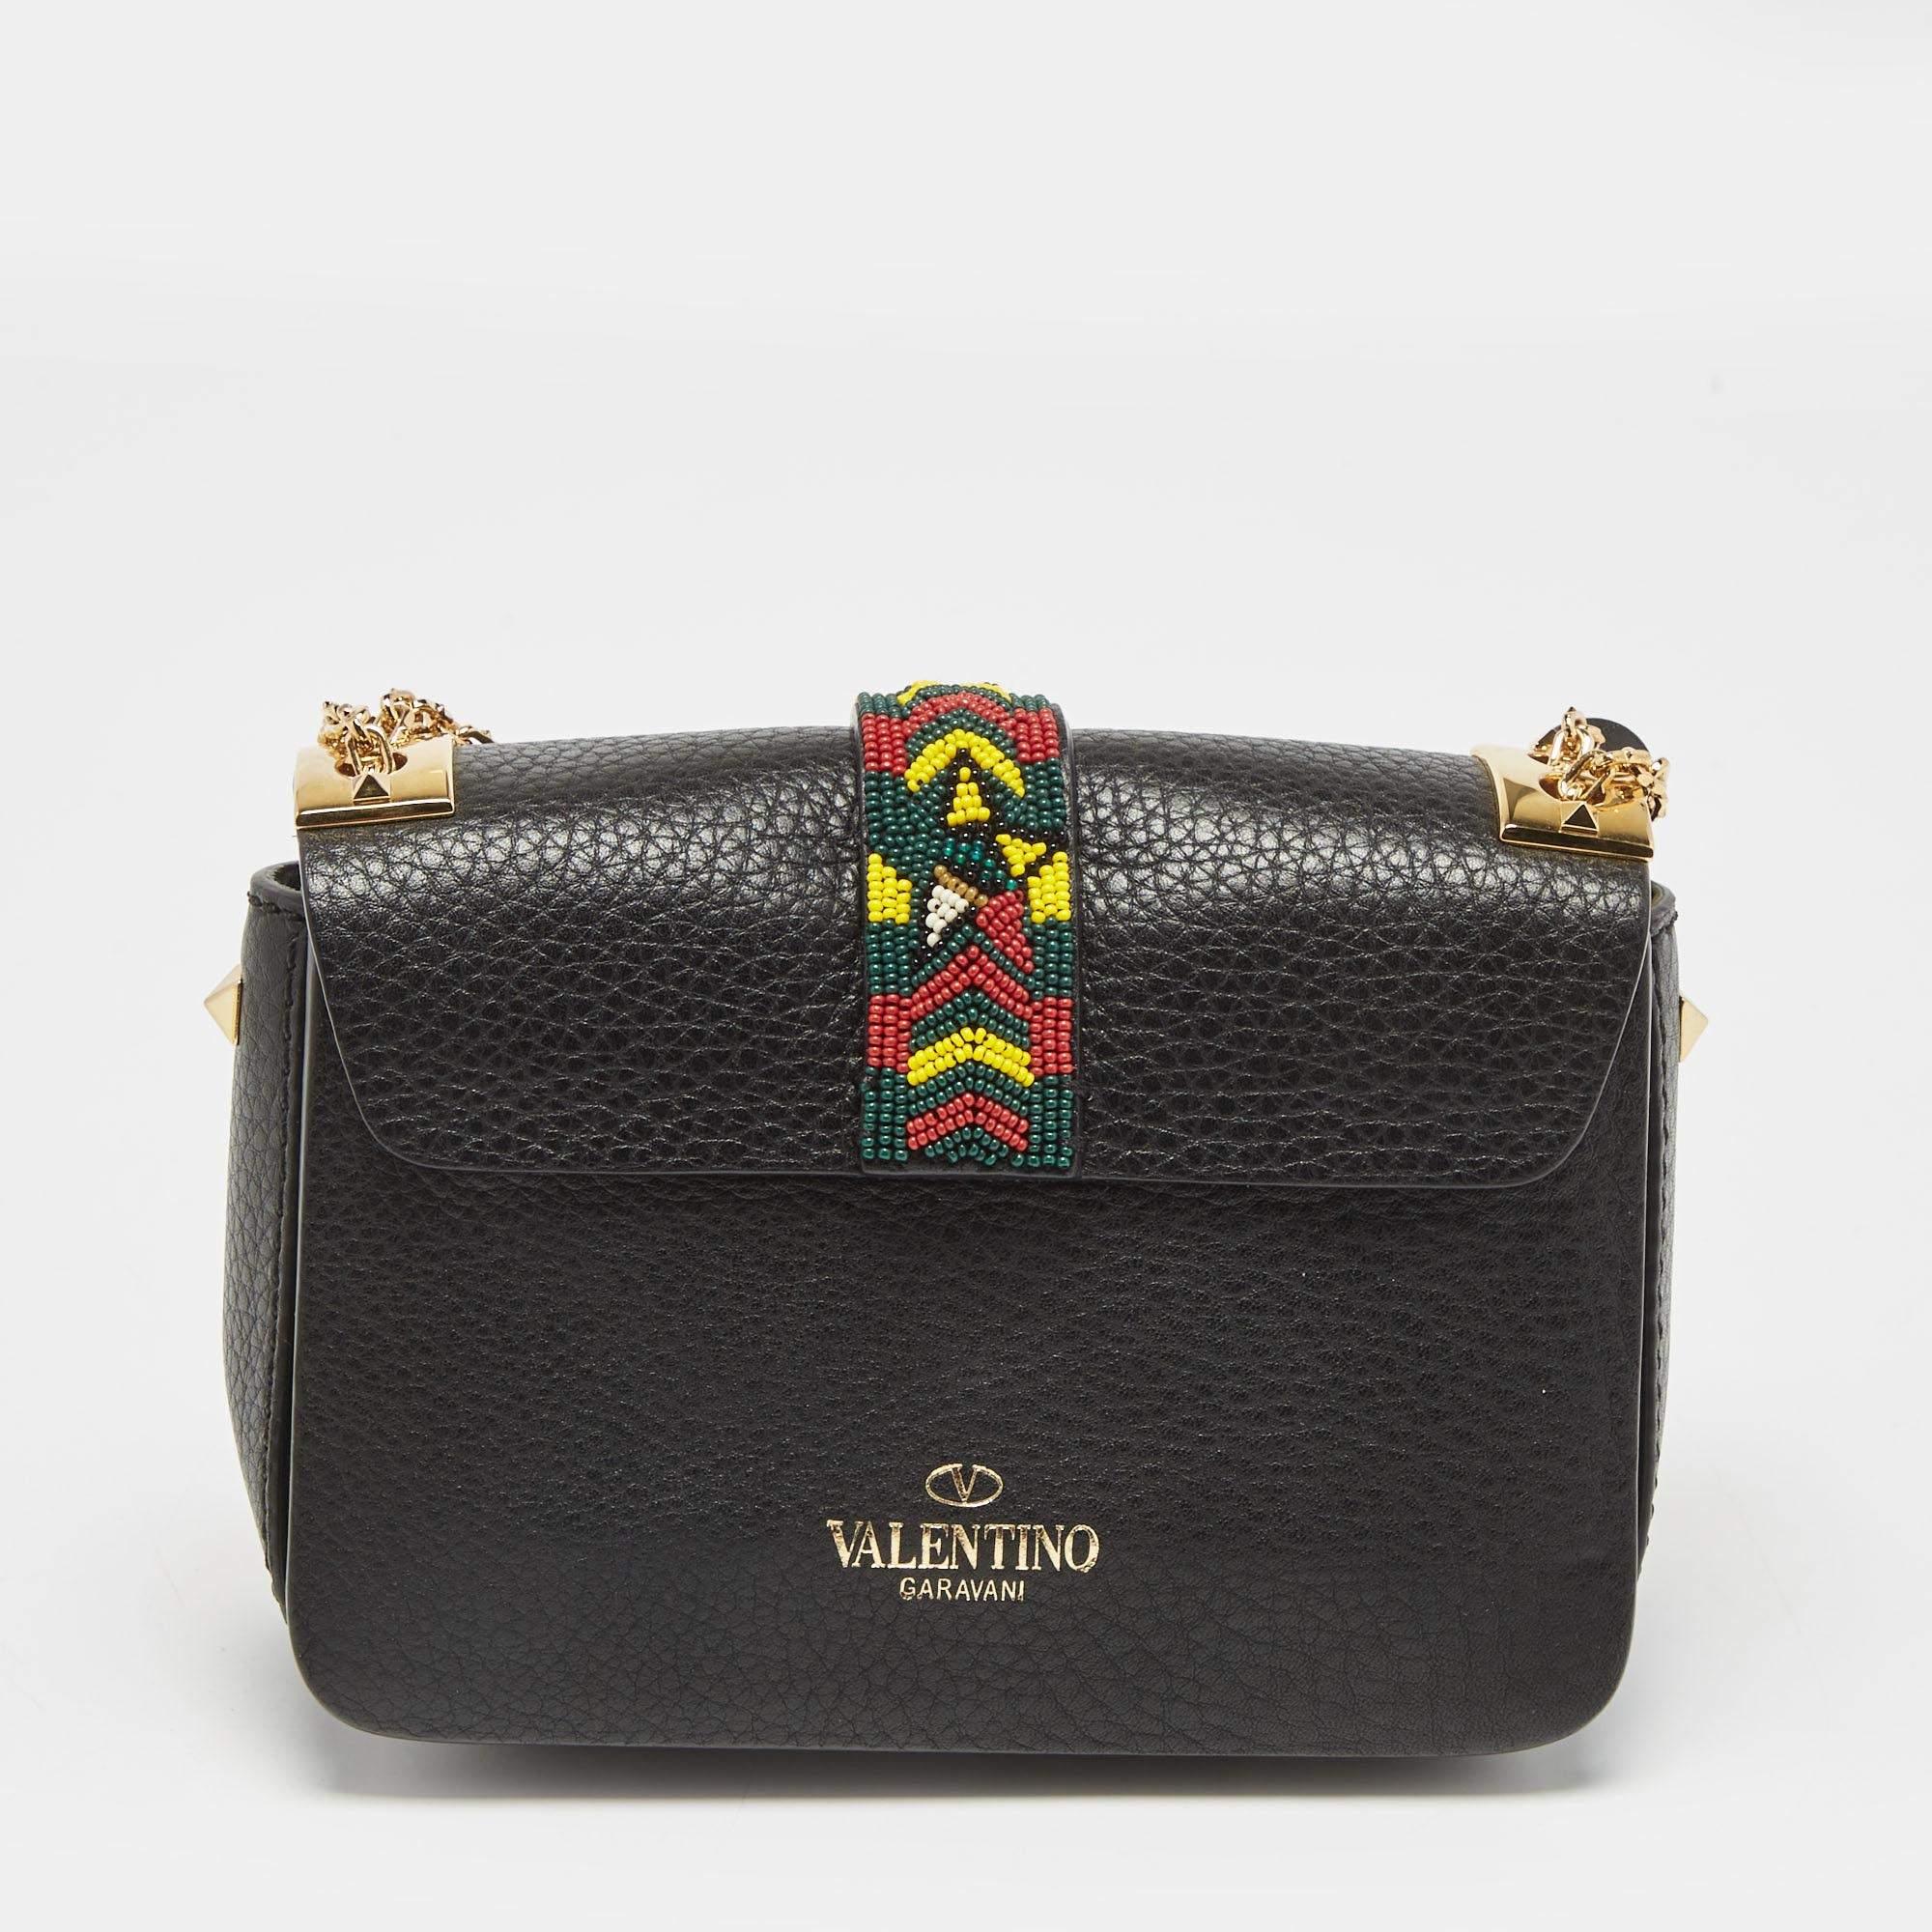 This feminine B Rockstud bag from Valentino is a great blend of modern style and class. The structure of the creation gives it a fashionable edge. Featuring a striking print on the leather exterior it is designed with Rockstud details on the flap.